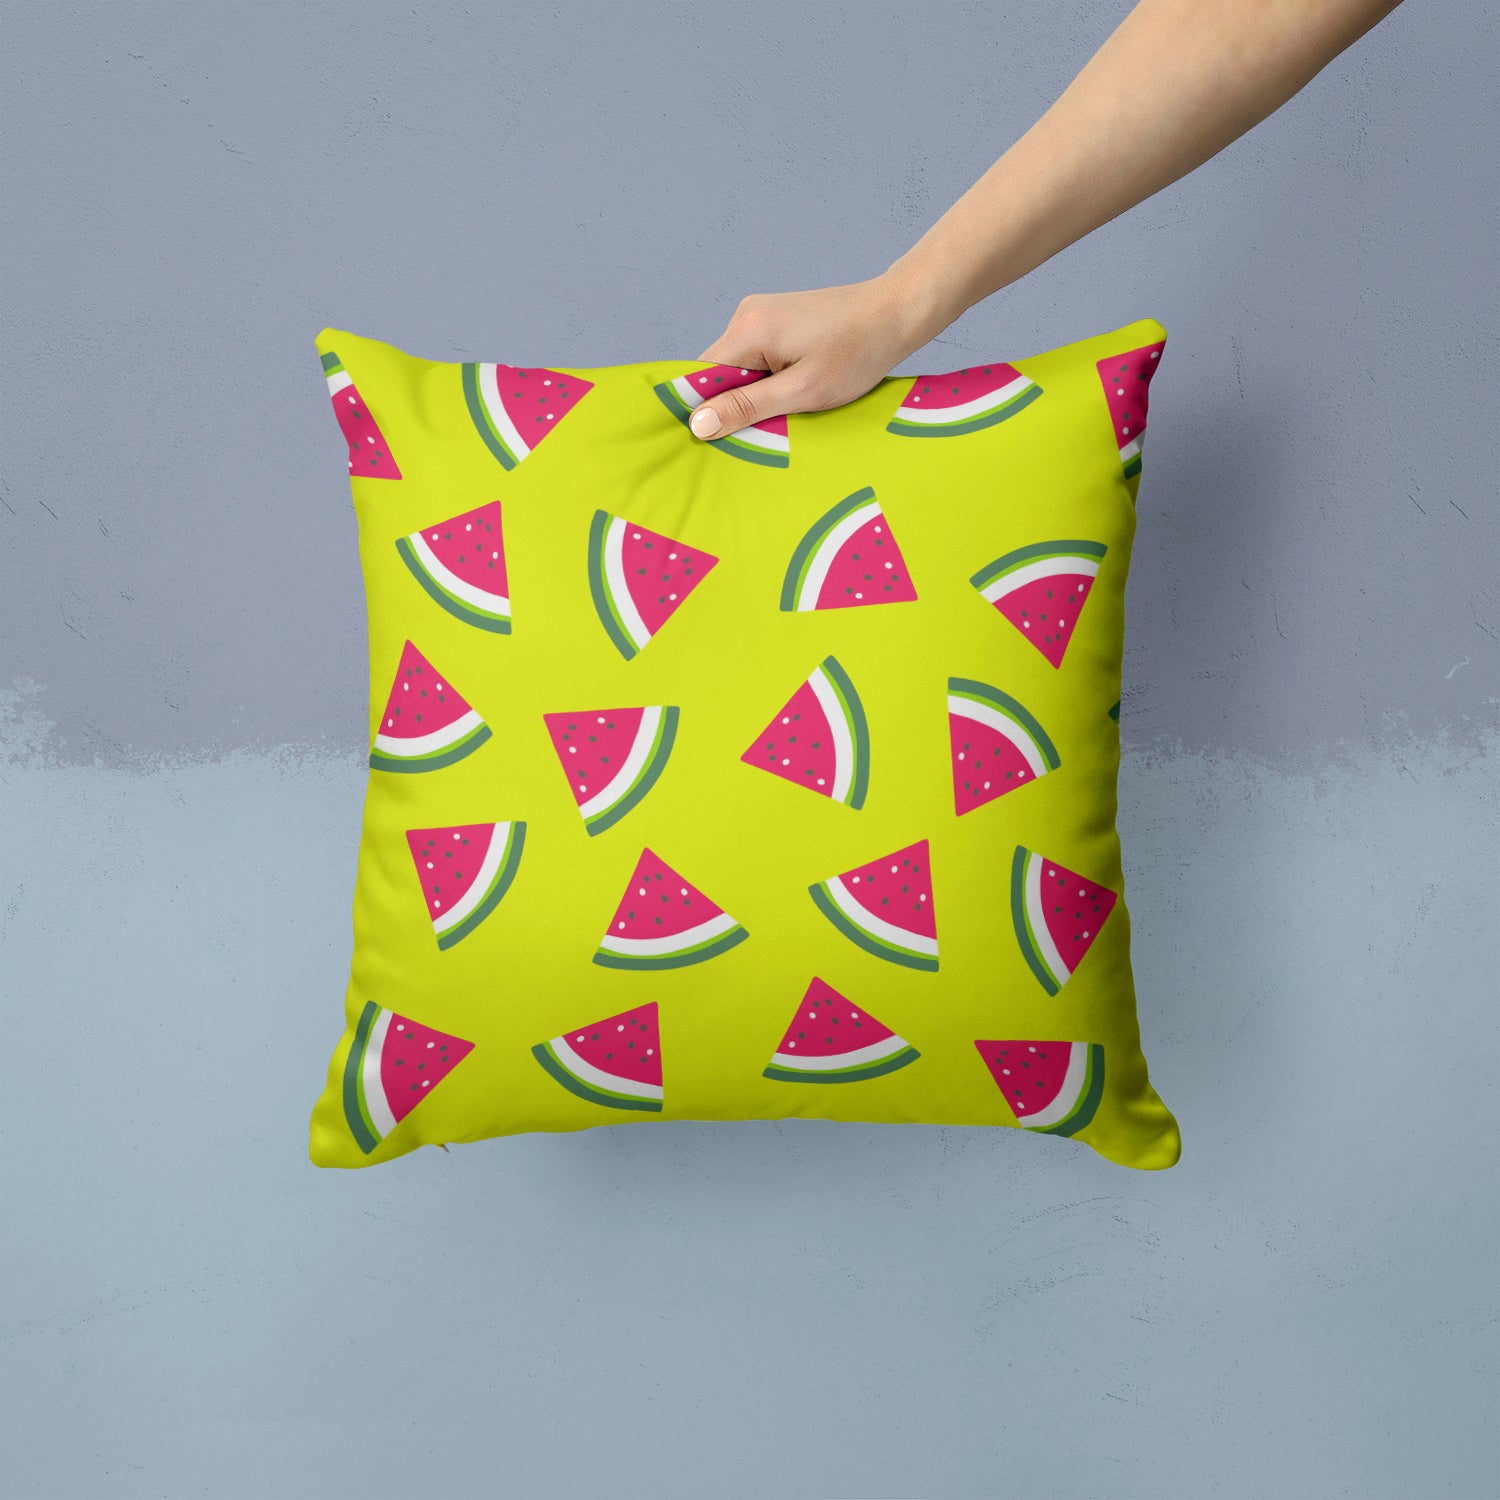 Watermelon on Lime Green Fabric Decorative Pillow BB5151PW1414 - the-store.com